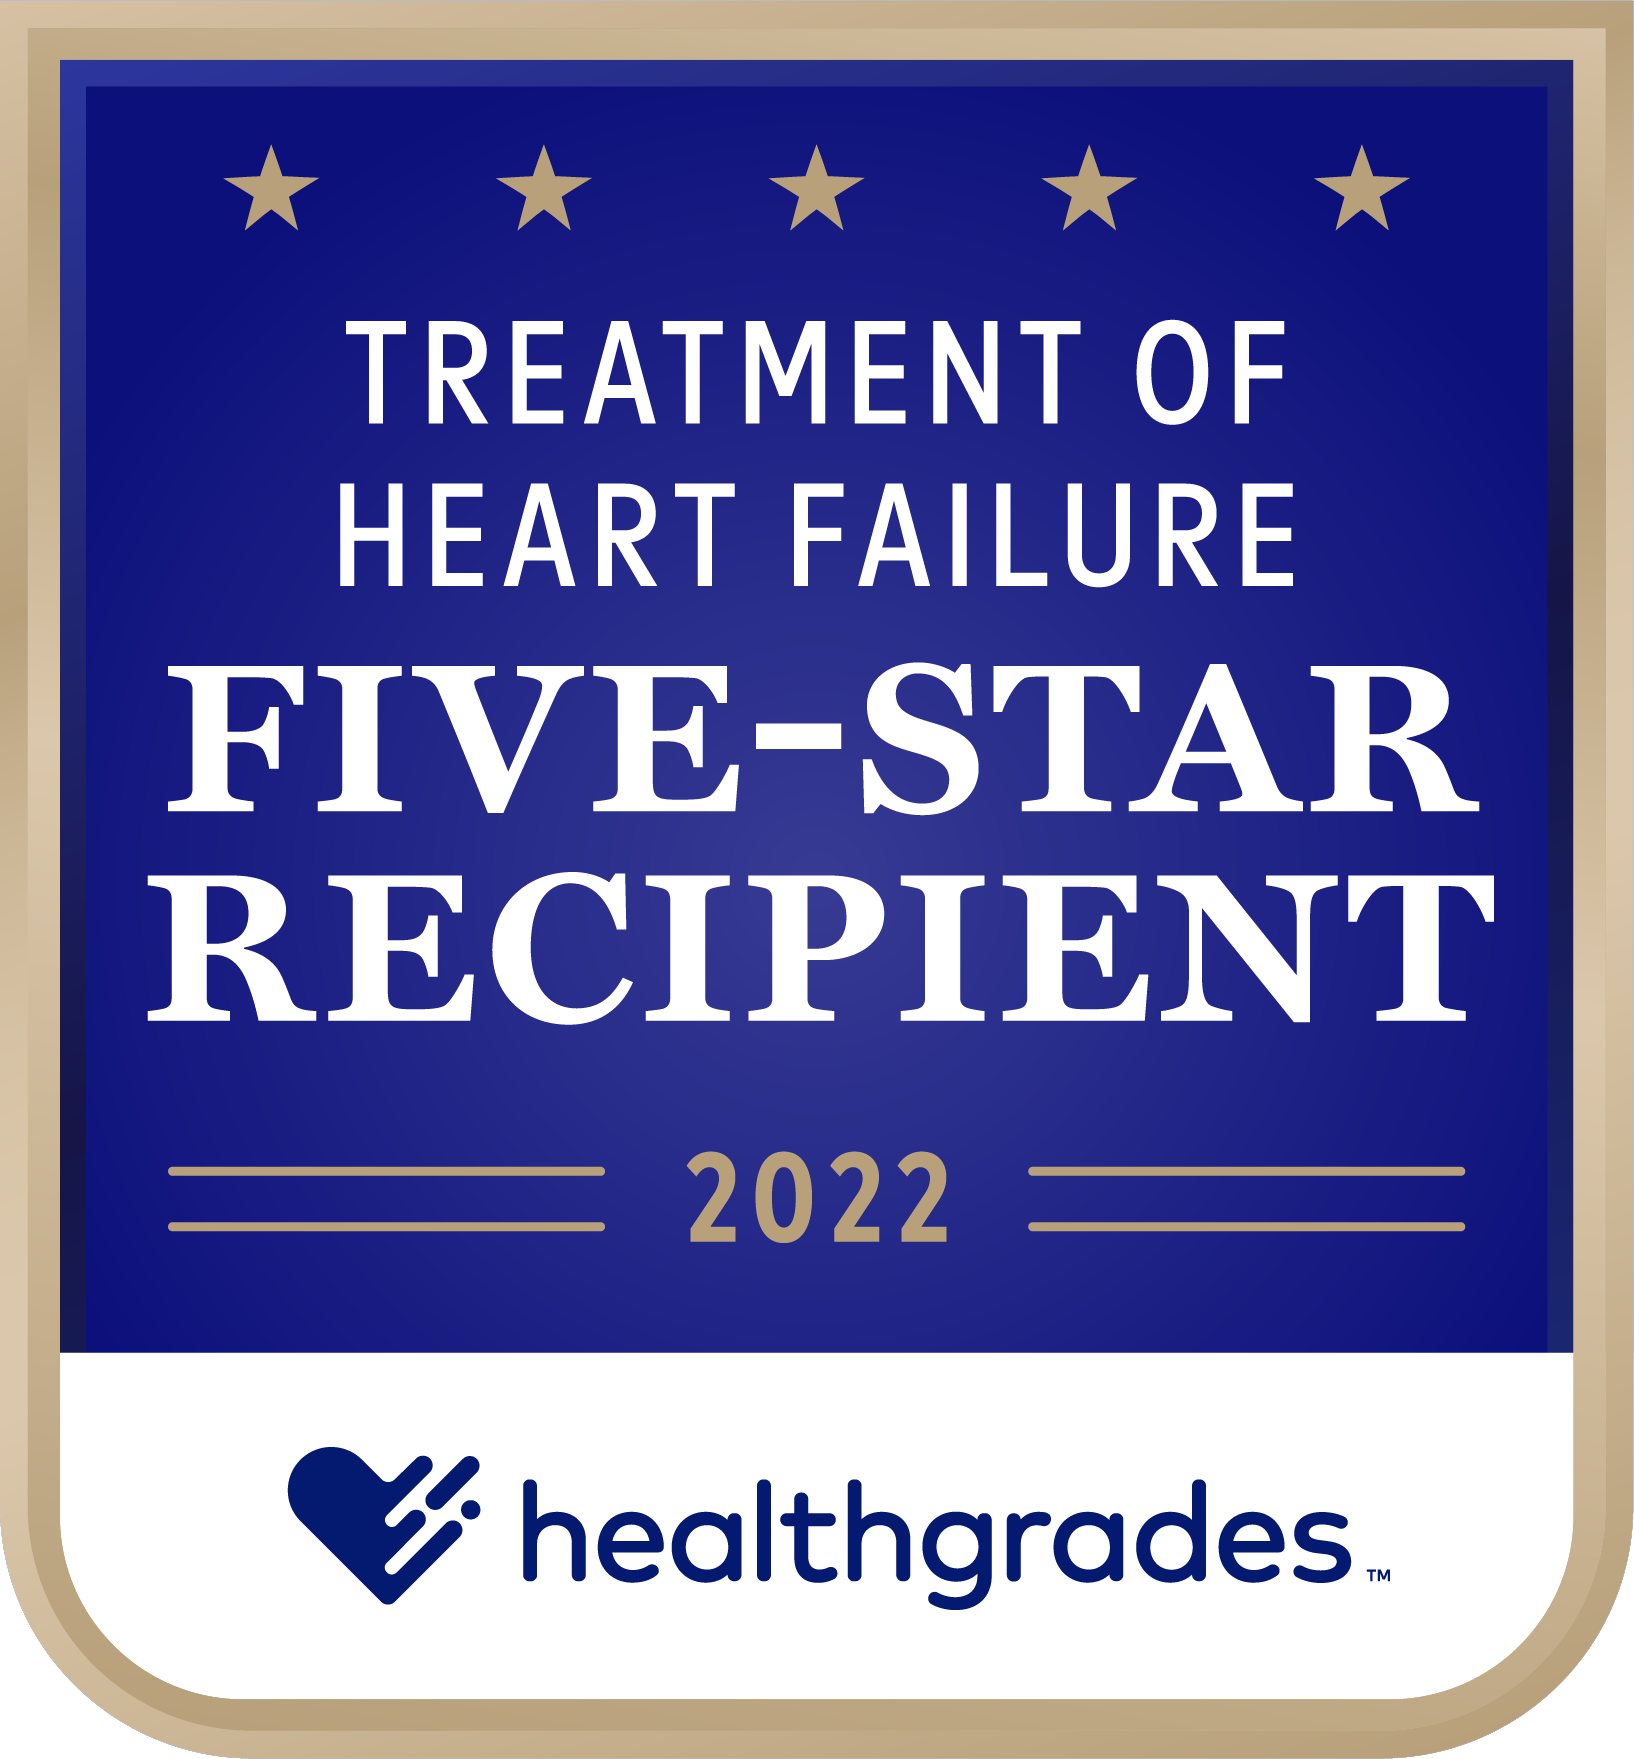 Five-Star Recipient for Treatment of Heart Failure in 2022 award